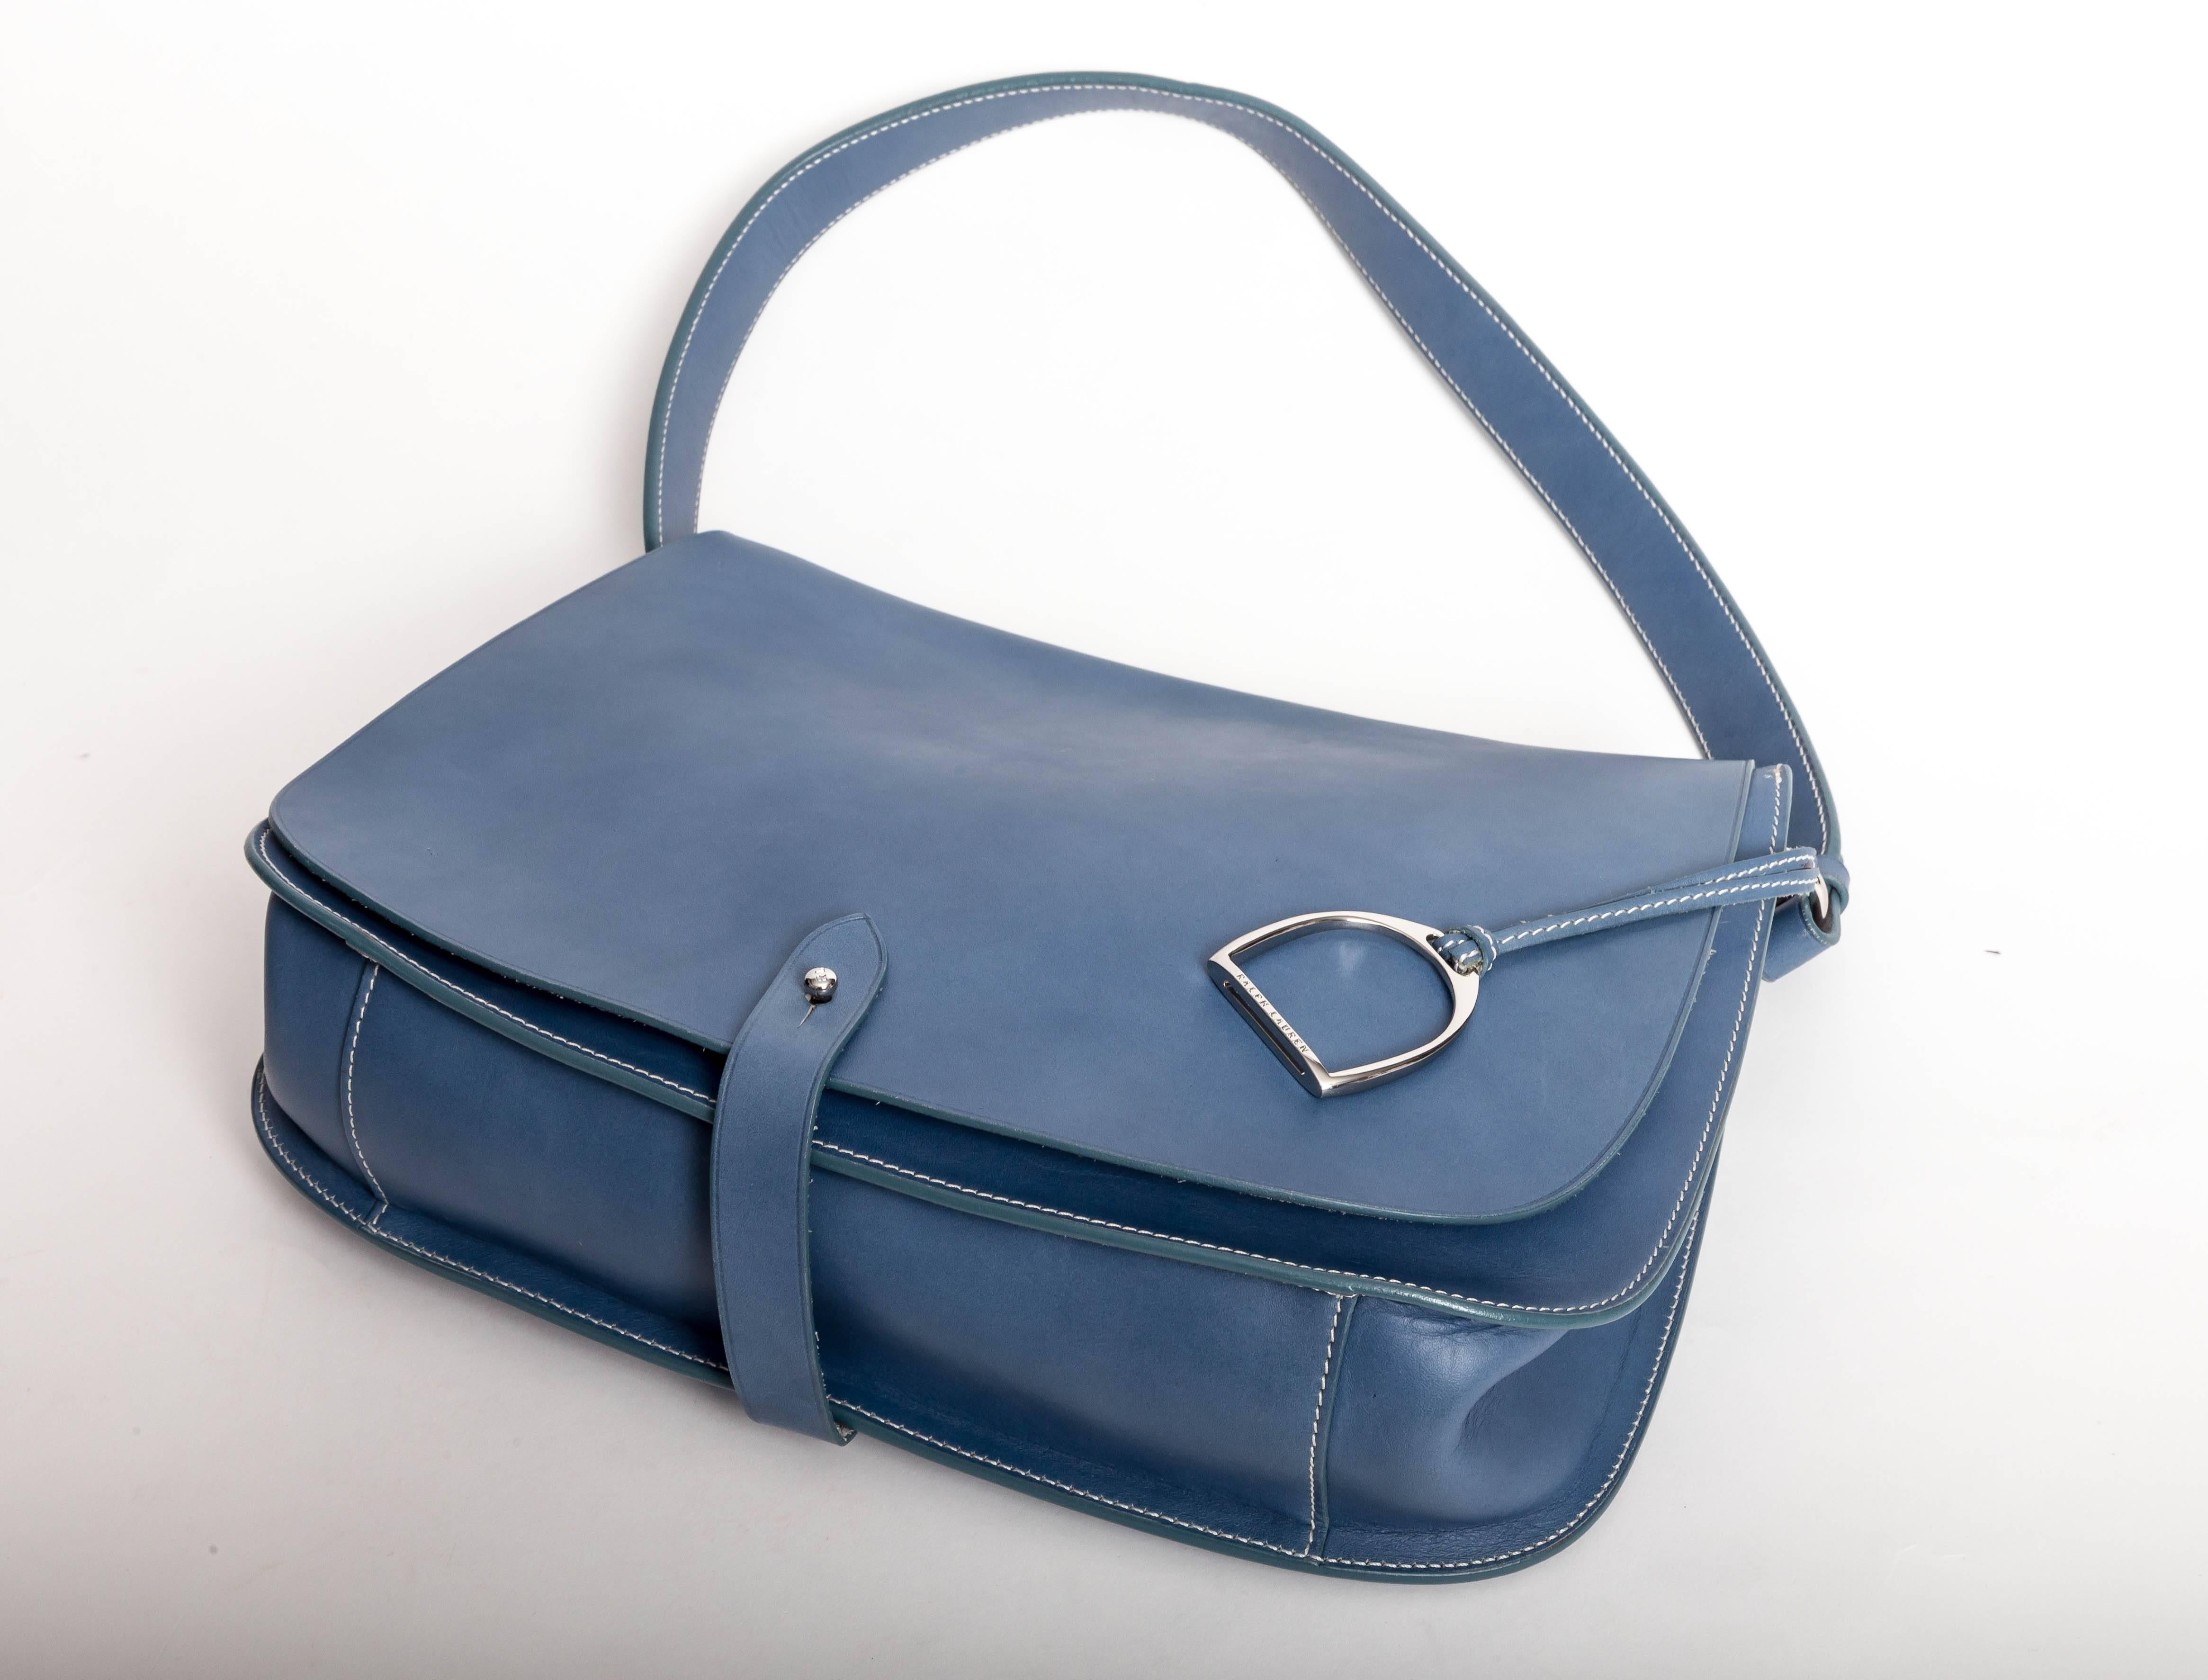 Great Ralph Lauren saddle bag in Sky Blue Leather.
Original retail price $1250
Condition is excellent with the exception of a couple of scratches to the rear of the bag.
Shoulder strap is adjustable.
Strap drop is 11.5 inches but can be made